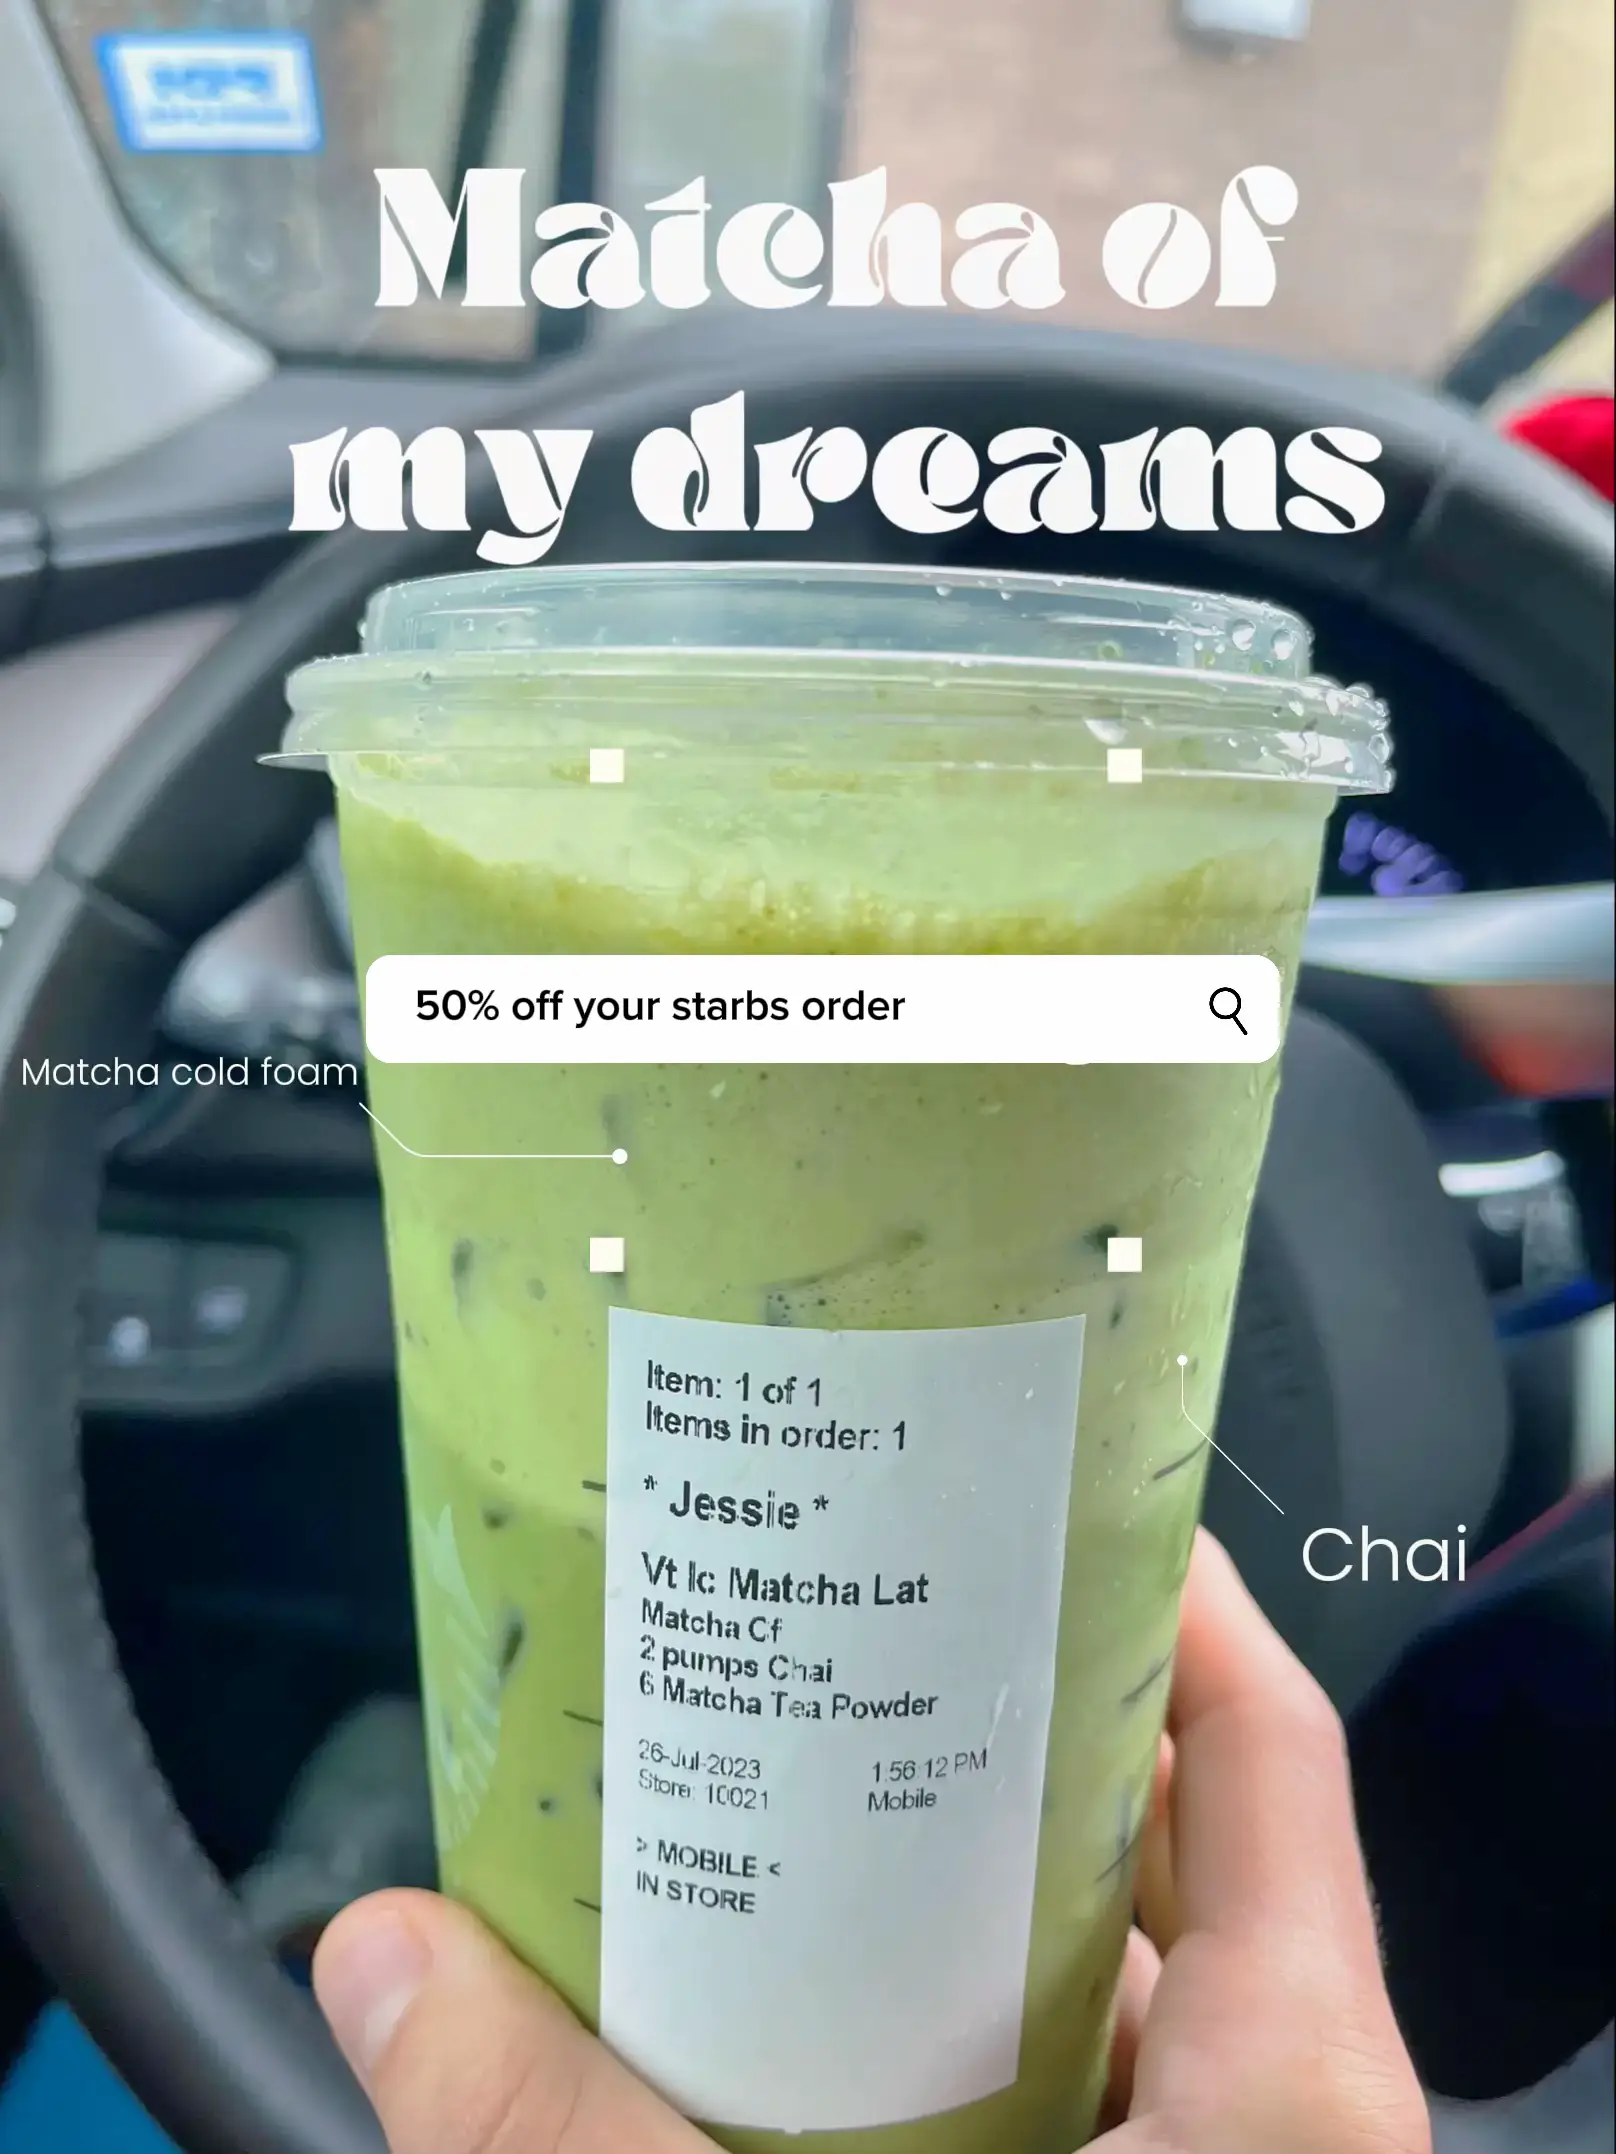 JOi Cafe - We love you so #matcha Have you tried our